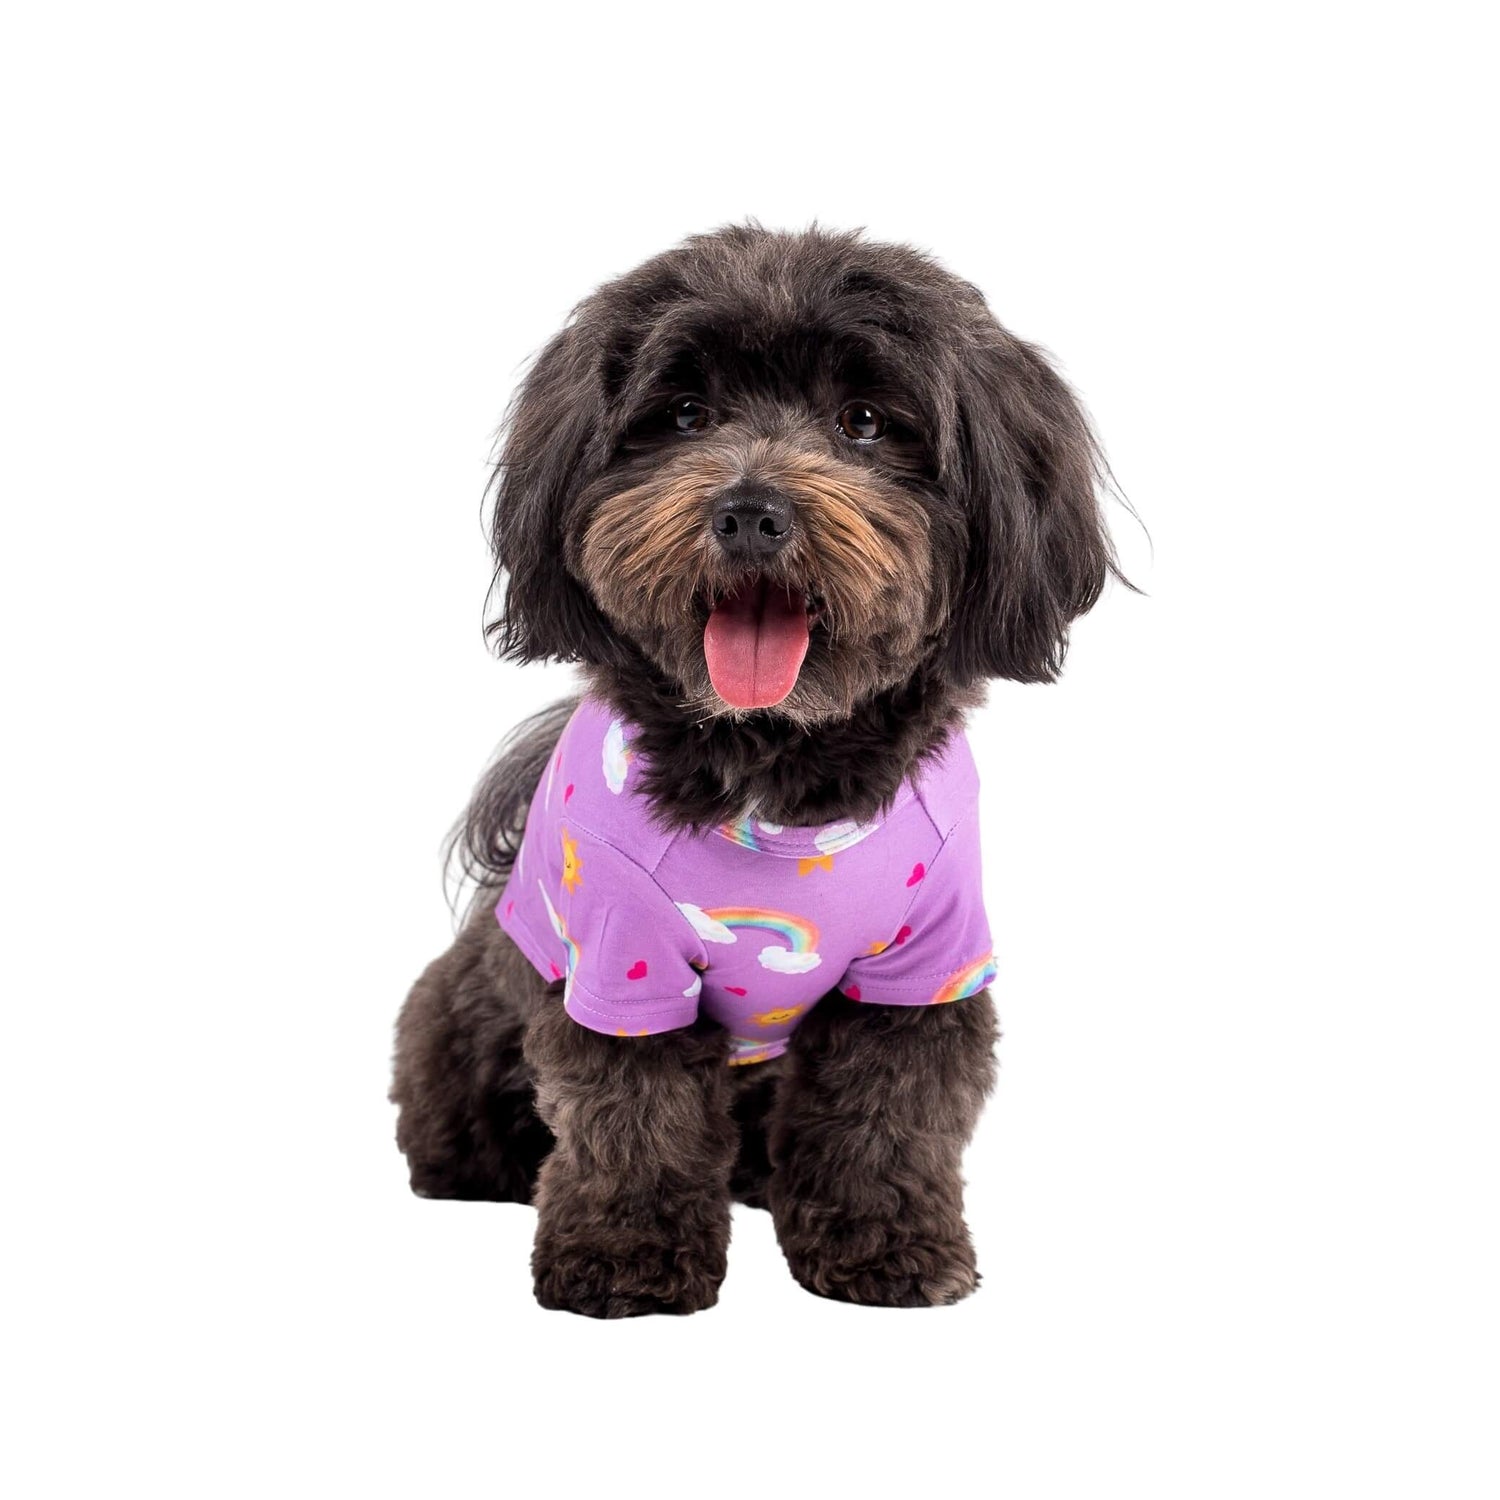 Close up of a brown Havanese dog wearing Vibrant Hound's Chasing Rainbow pyjamas for dogs. These PJs are purple with rainbows, bright suns, and love hearts printed on it.